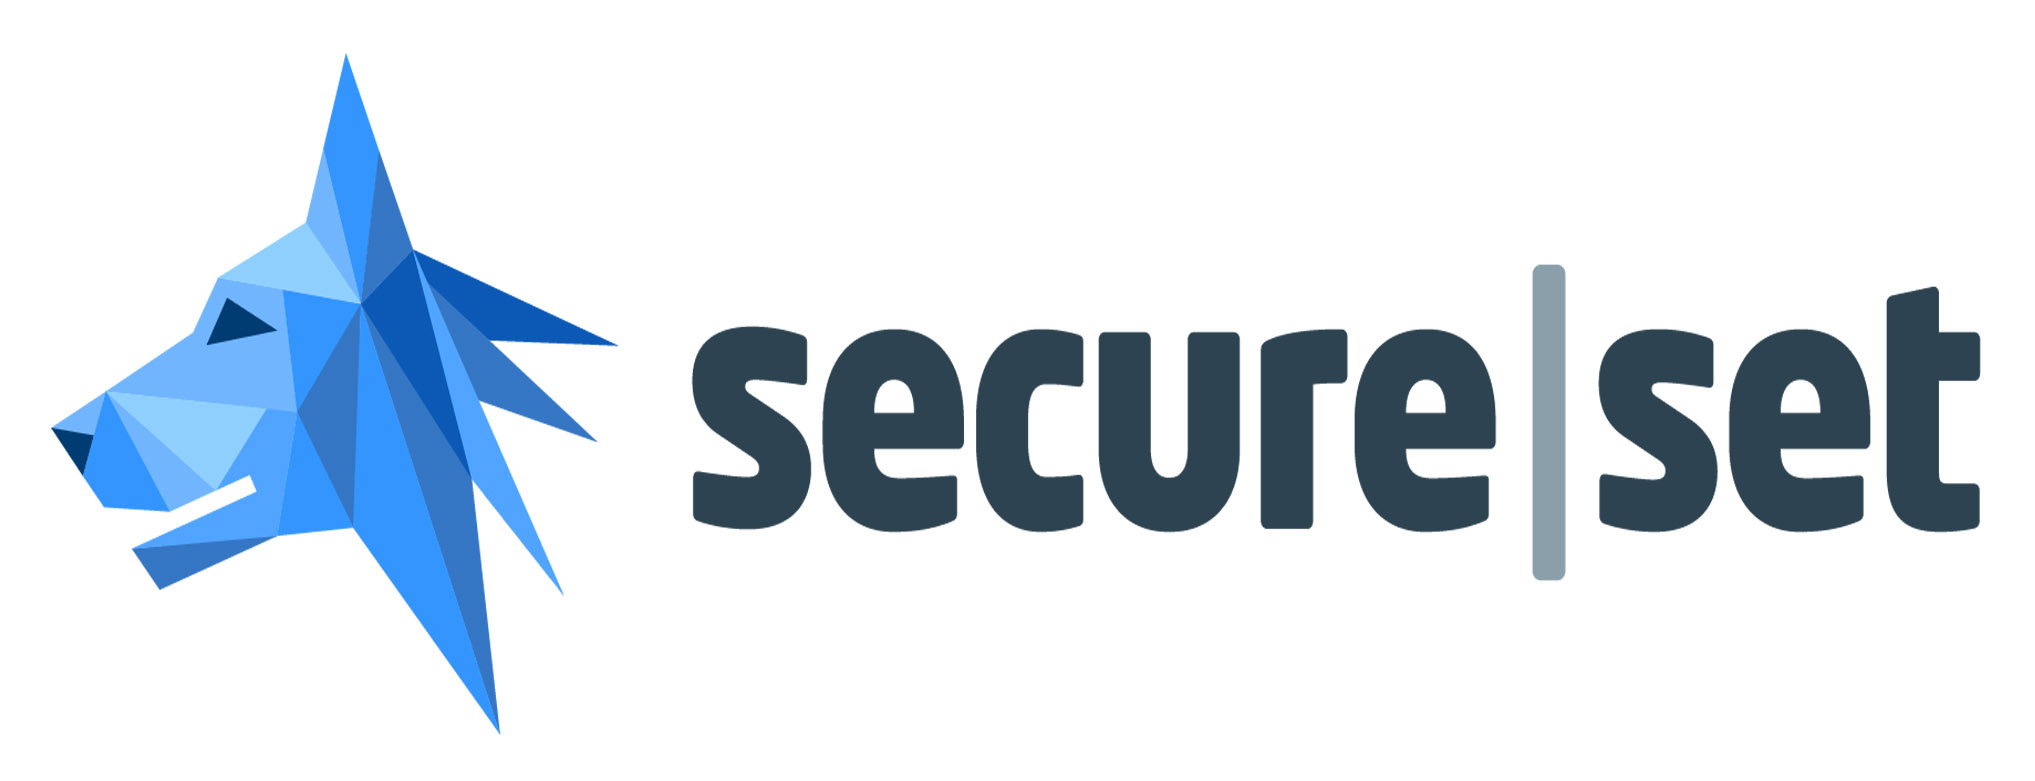 SecureSet Academy secures $4M Series A round to expand cybersecurity bootcamps, fill talent gap